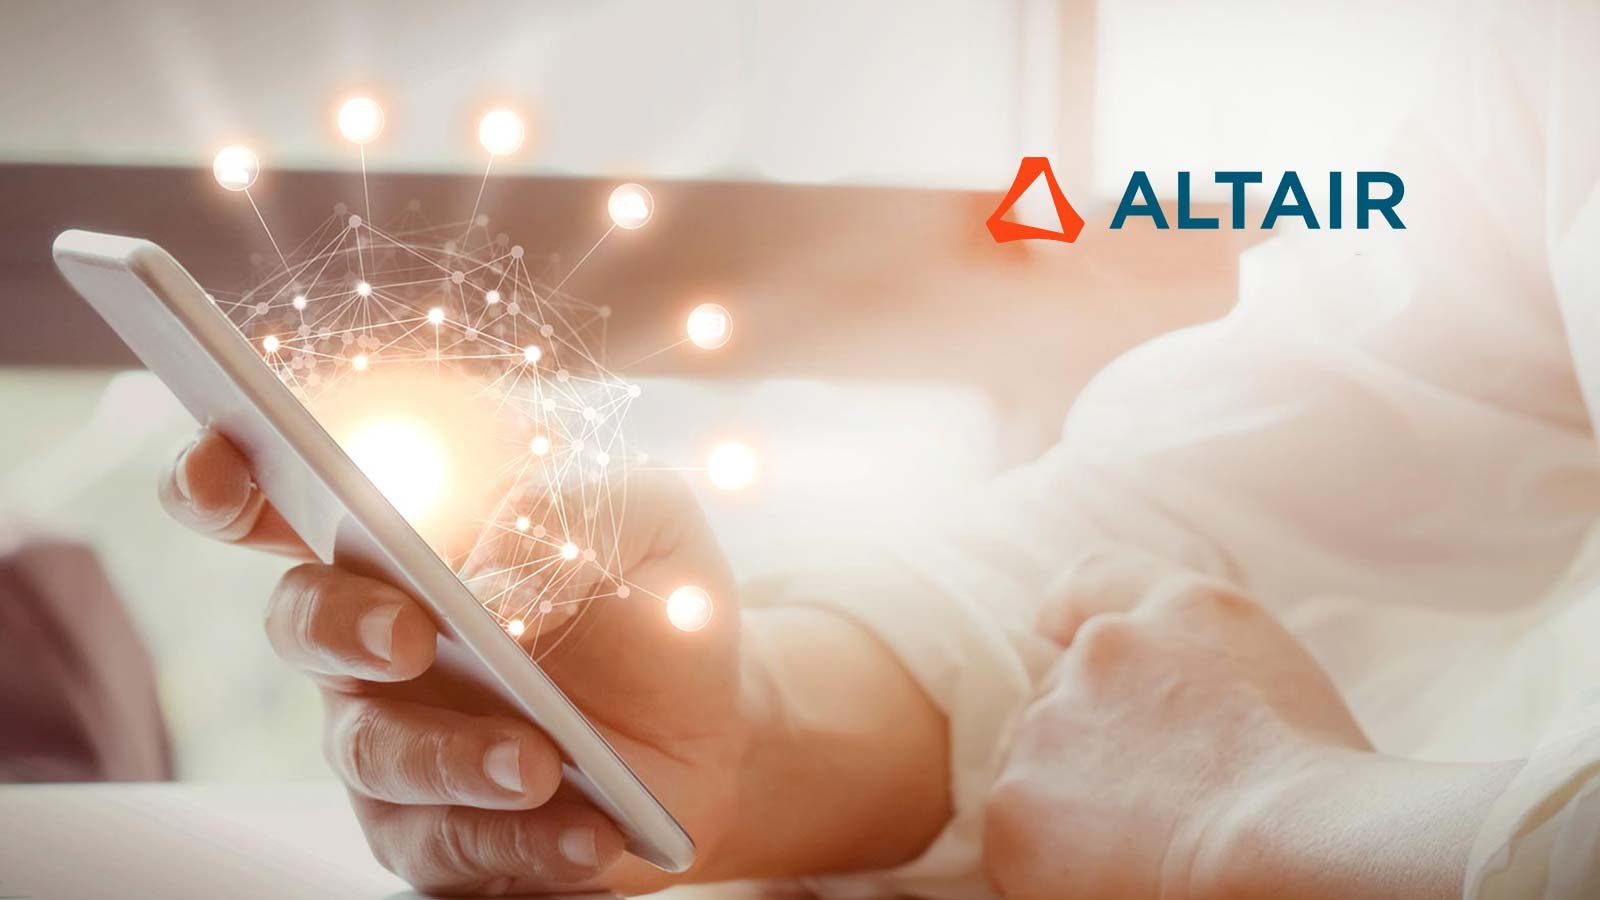 Altair Expands Digital Engineering Know-how with Acquisition of OmniV